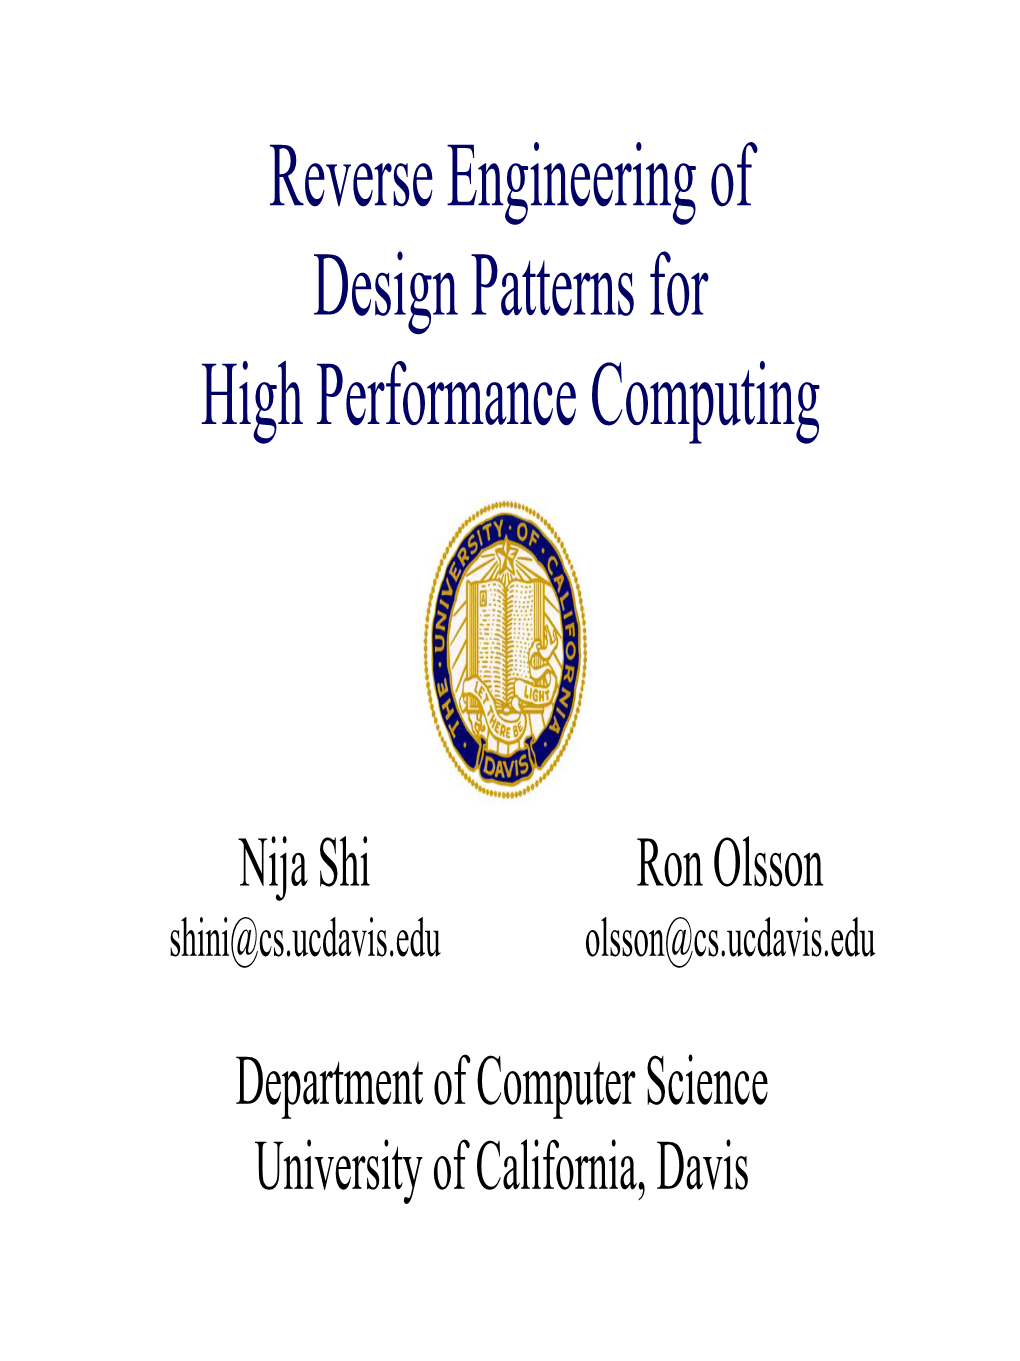 Reverse Engineering of Design Patterns for High Performance Computing